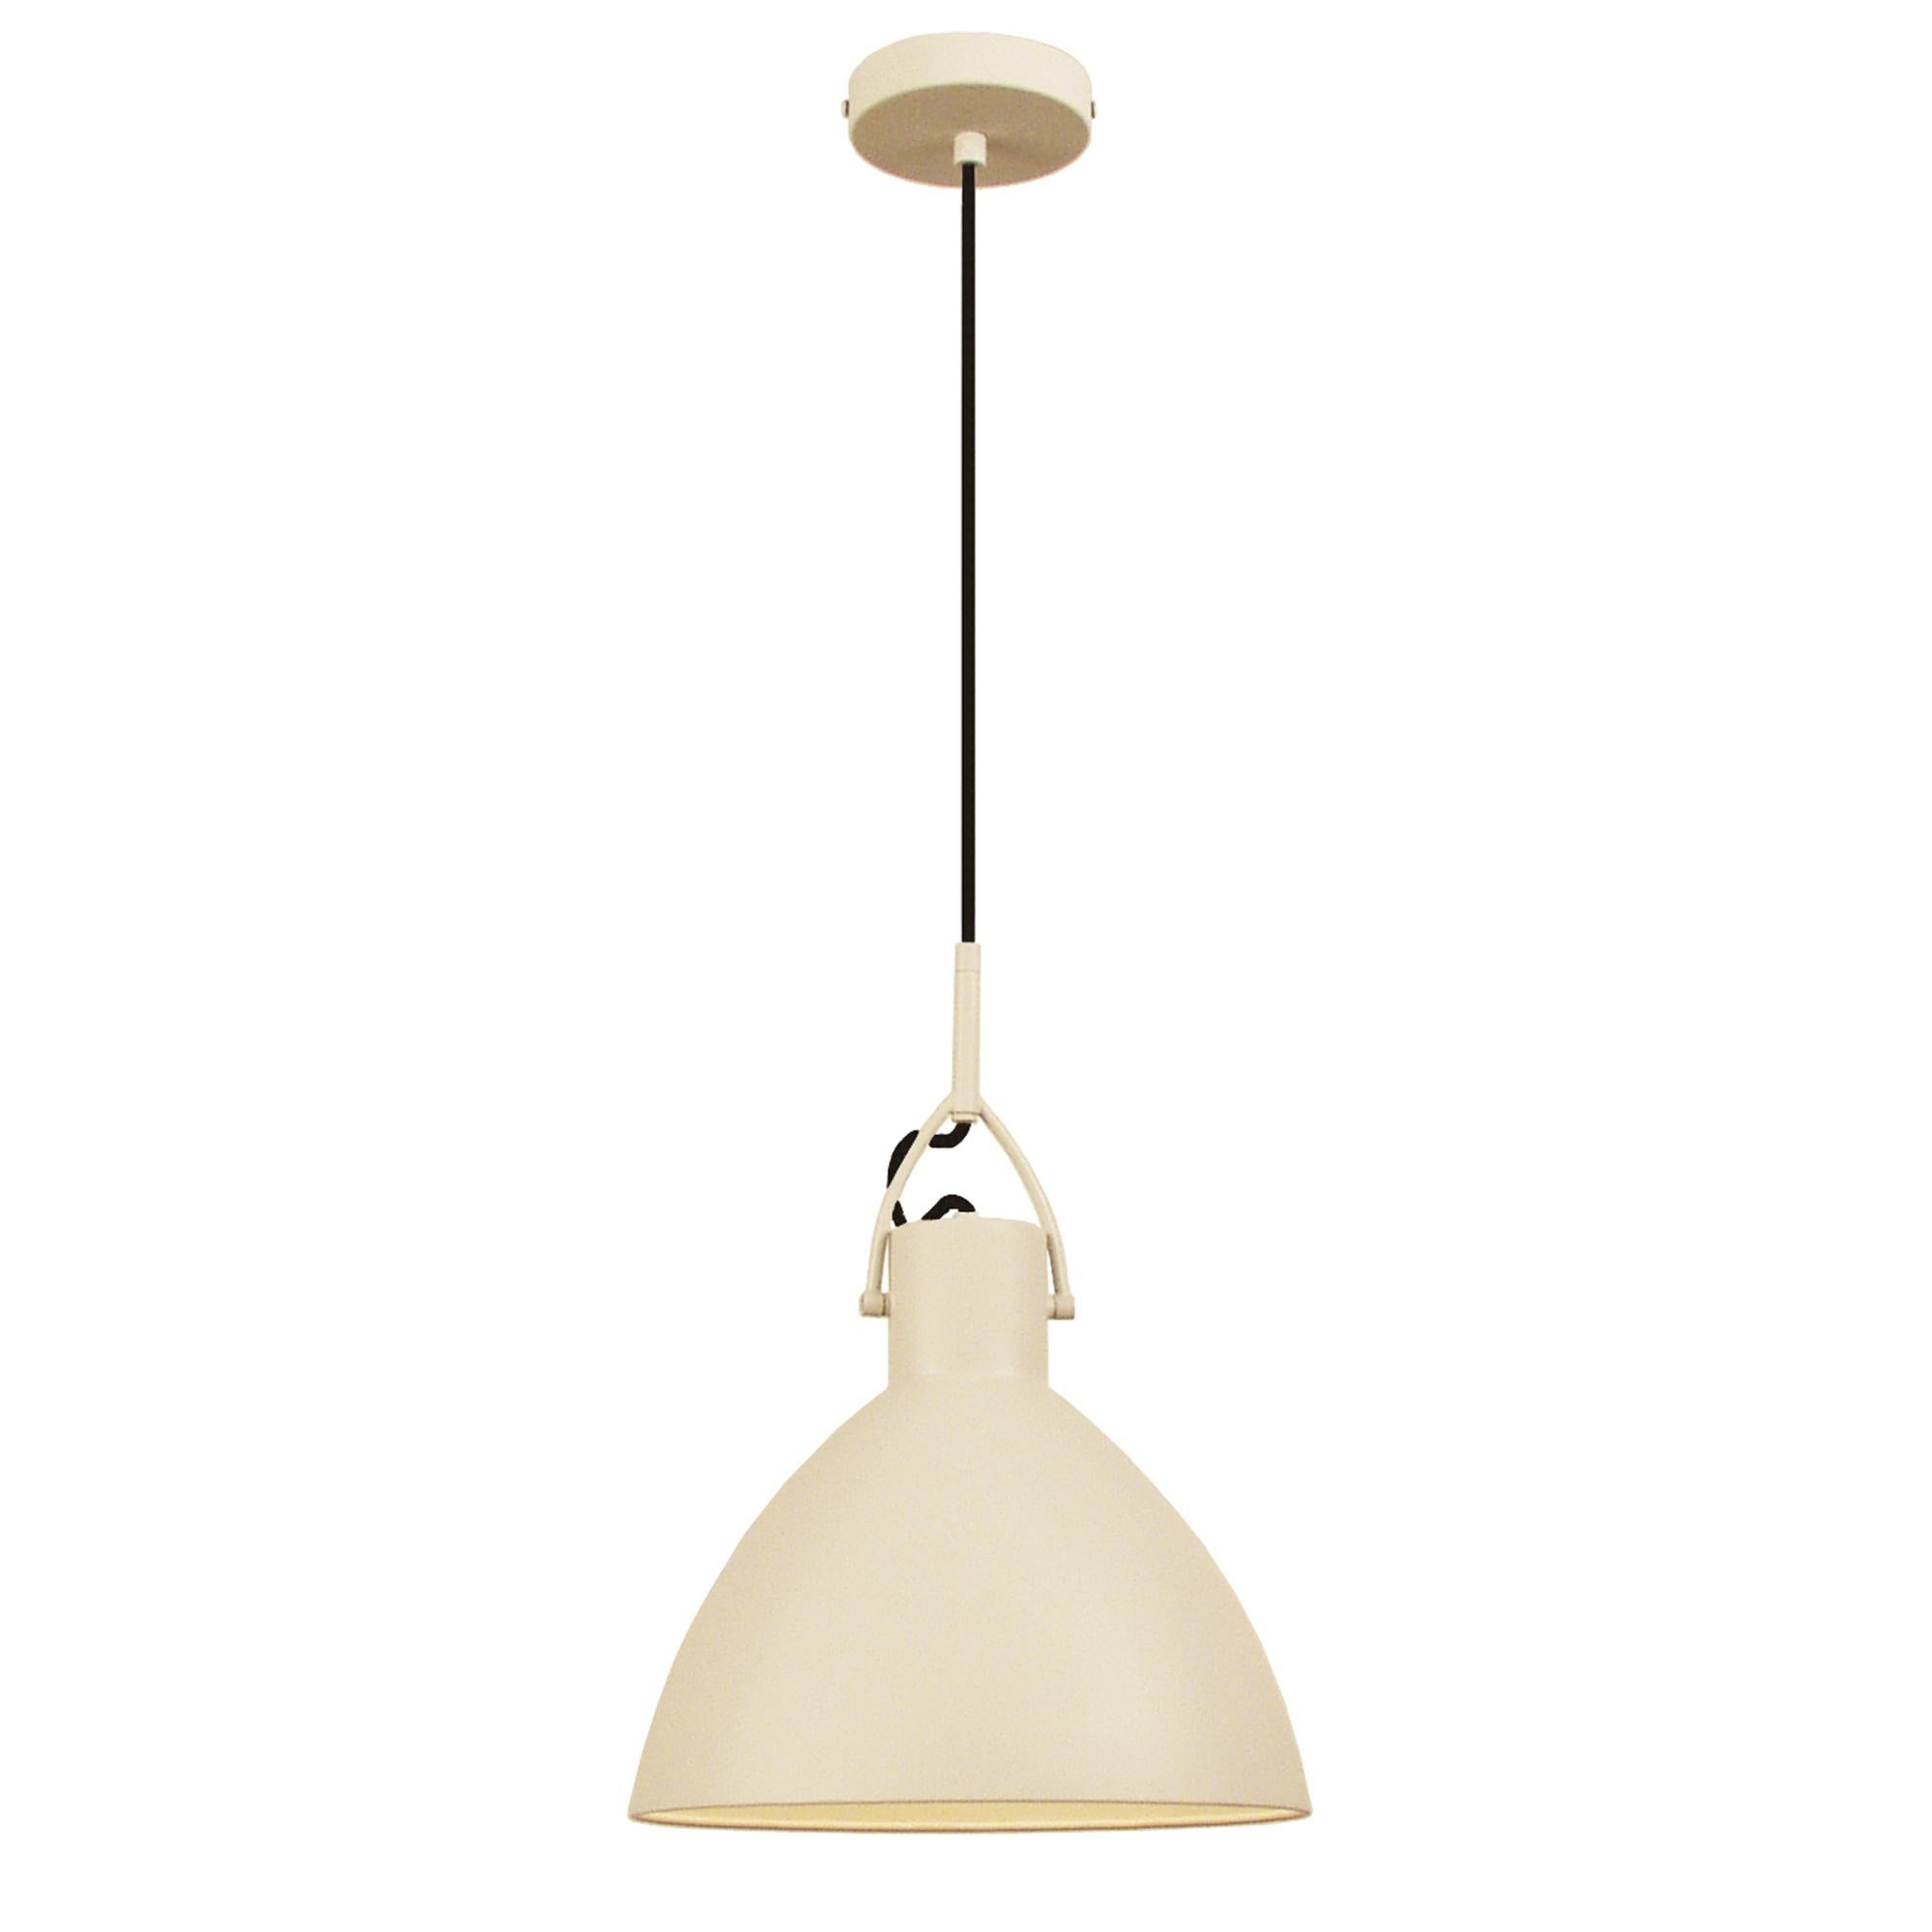 The LAITO’s vintage shape brings back the silhouette of what lamps use to look like when you walked into a bank or library back in the day. Our specially designed fishbone structure enhances balance and allows rotation in the lampshade. We’ve taken